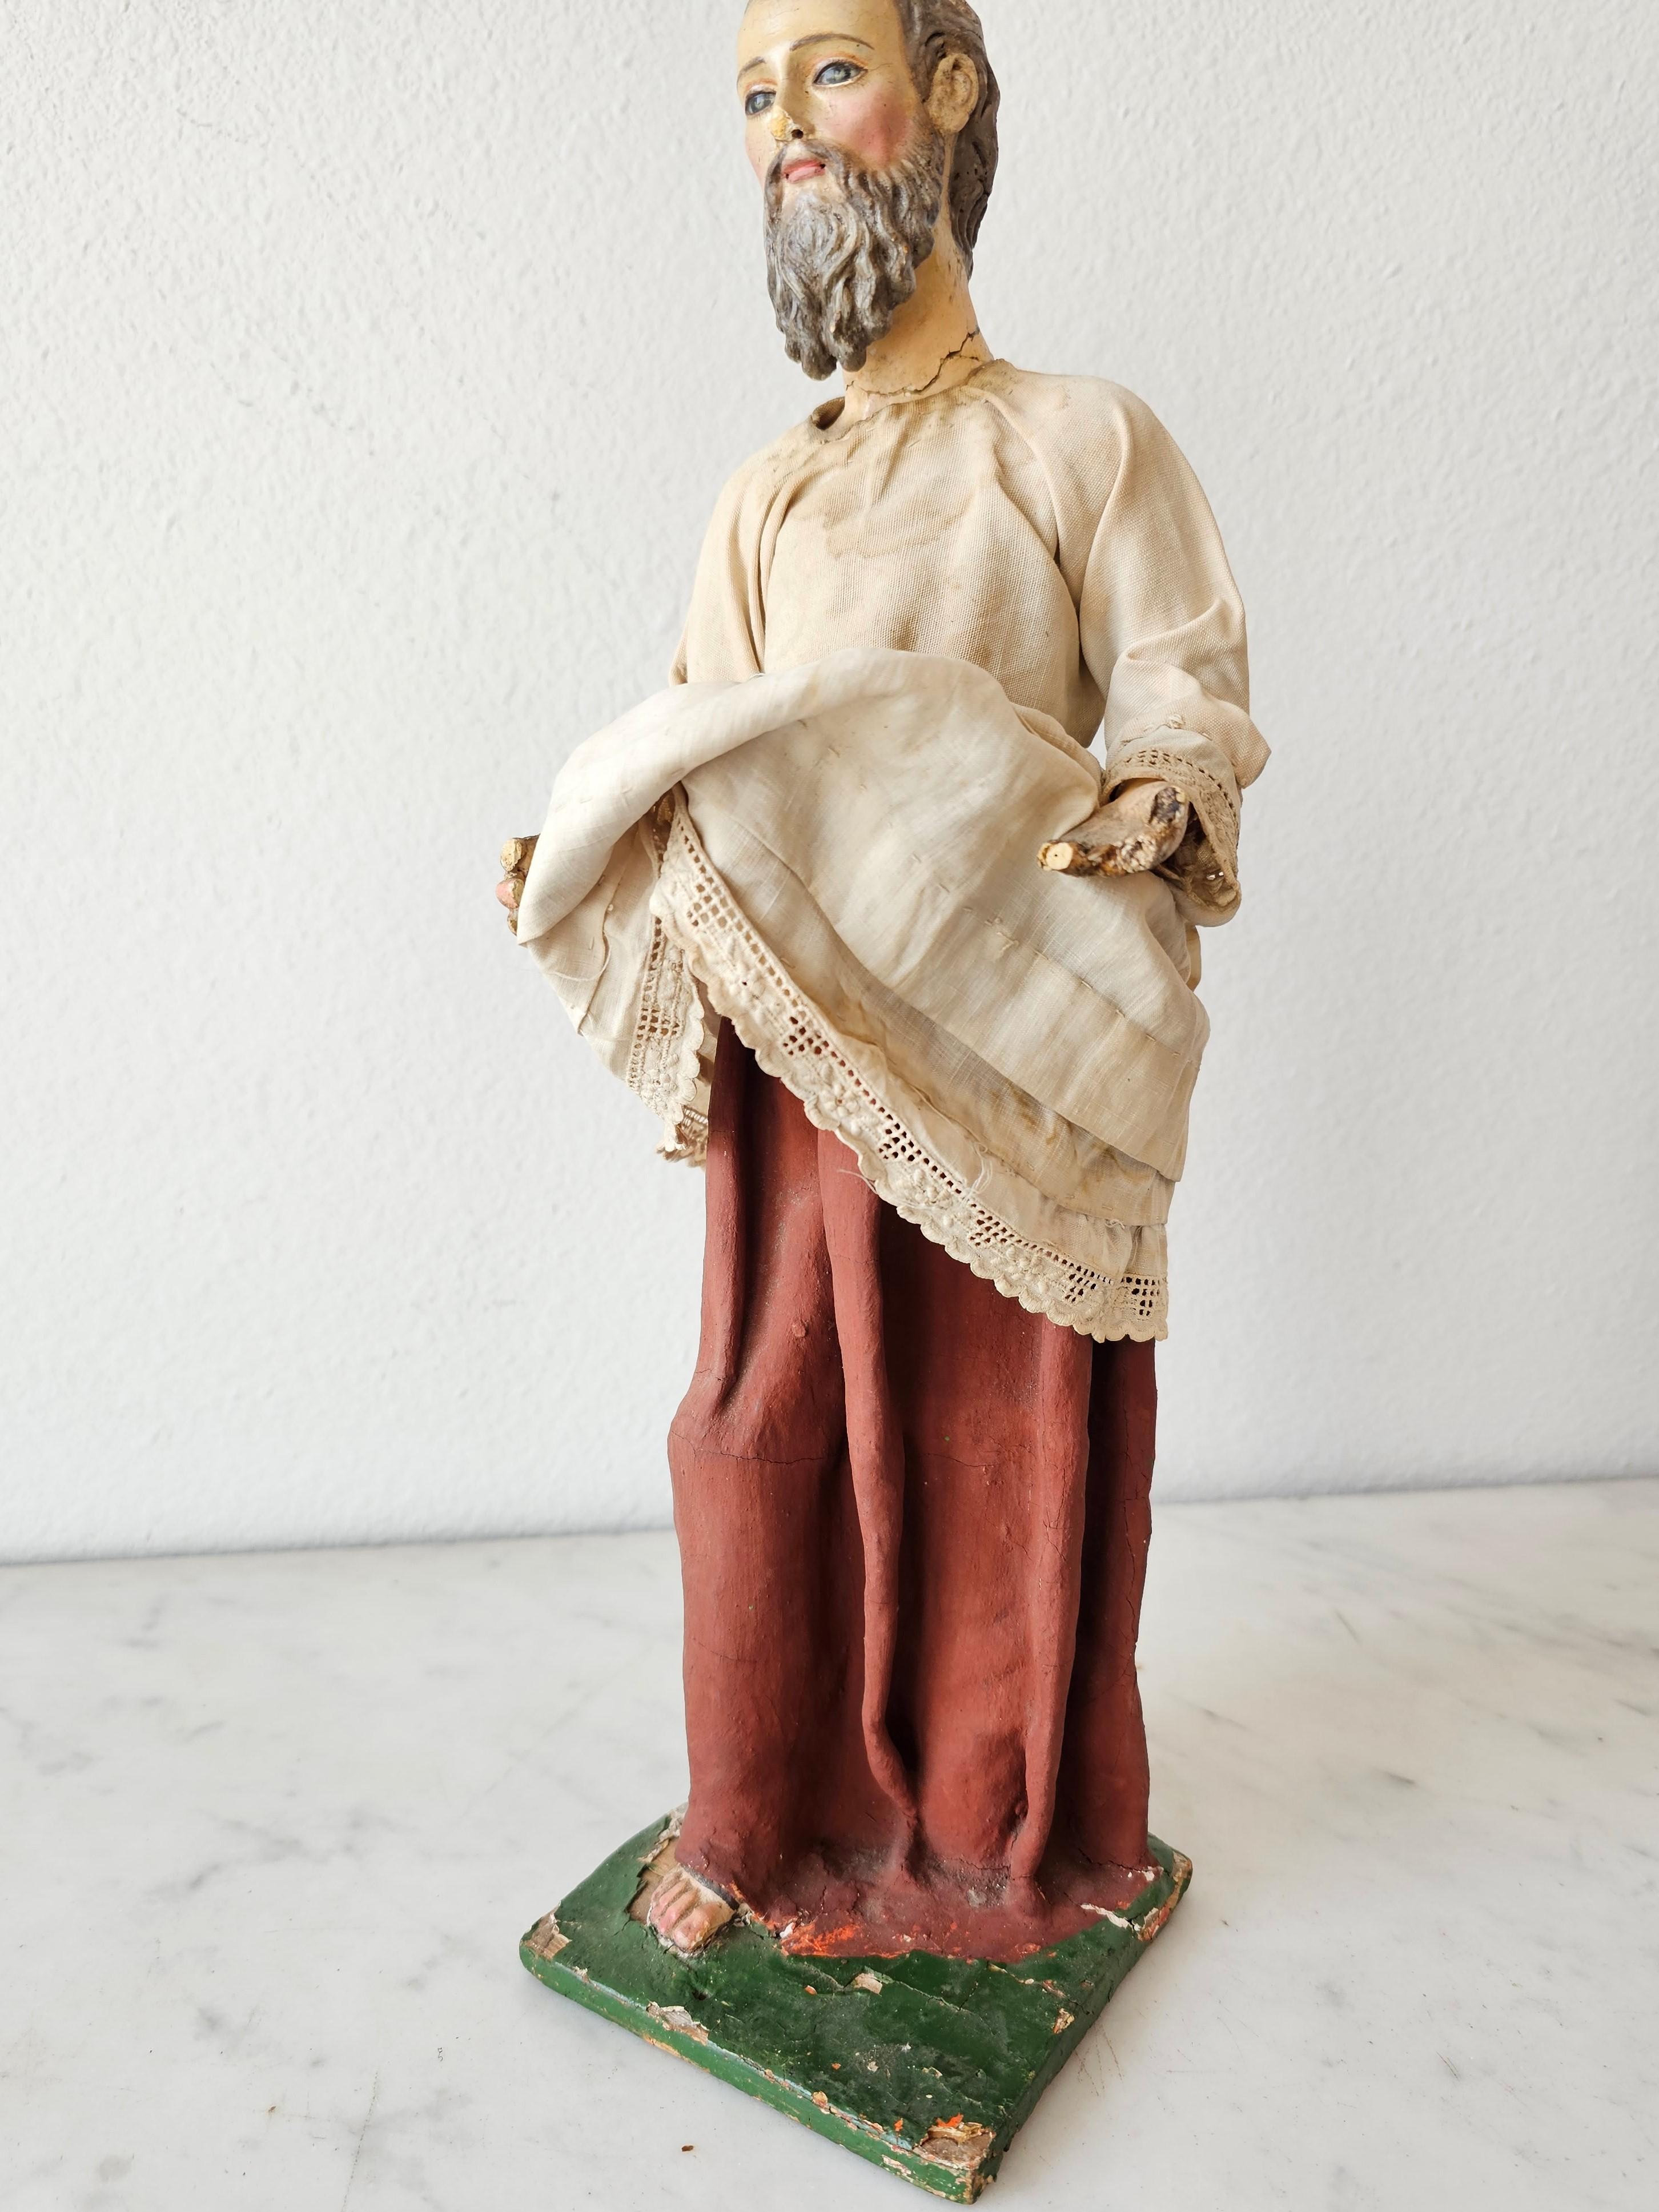 17th/18th Century Baroque Period Carved Polychrome Santo Altar Statue In Good Condition For Sale In Forney, TX